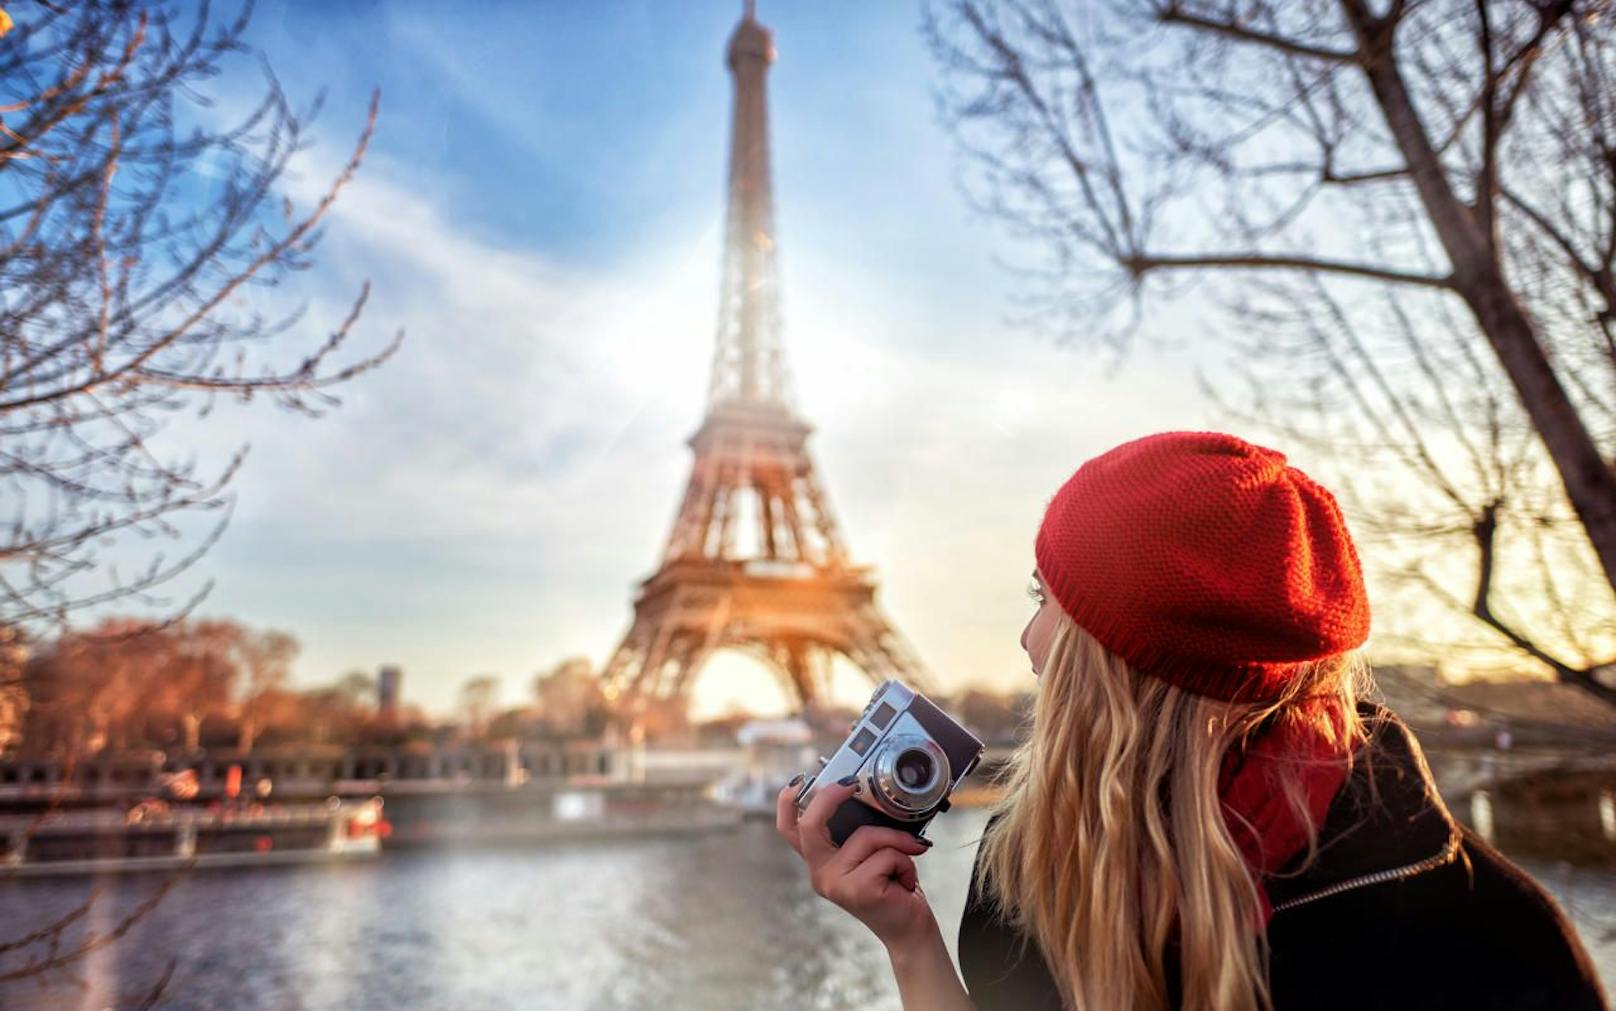 traveling and lifestyle concept.tourist woman with red beret admiring the Eiffel tower and holding camera in her hand.